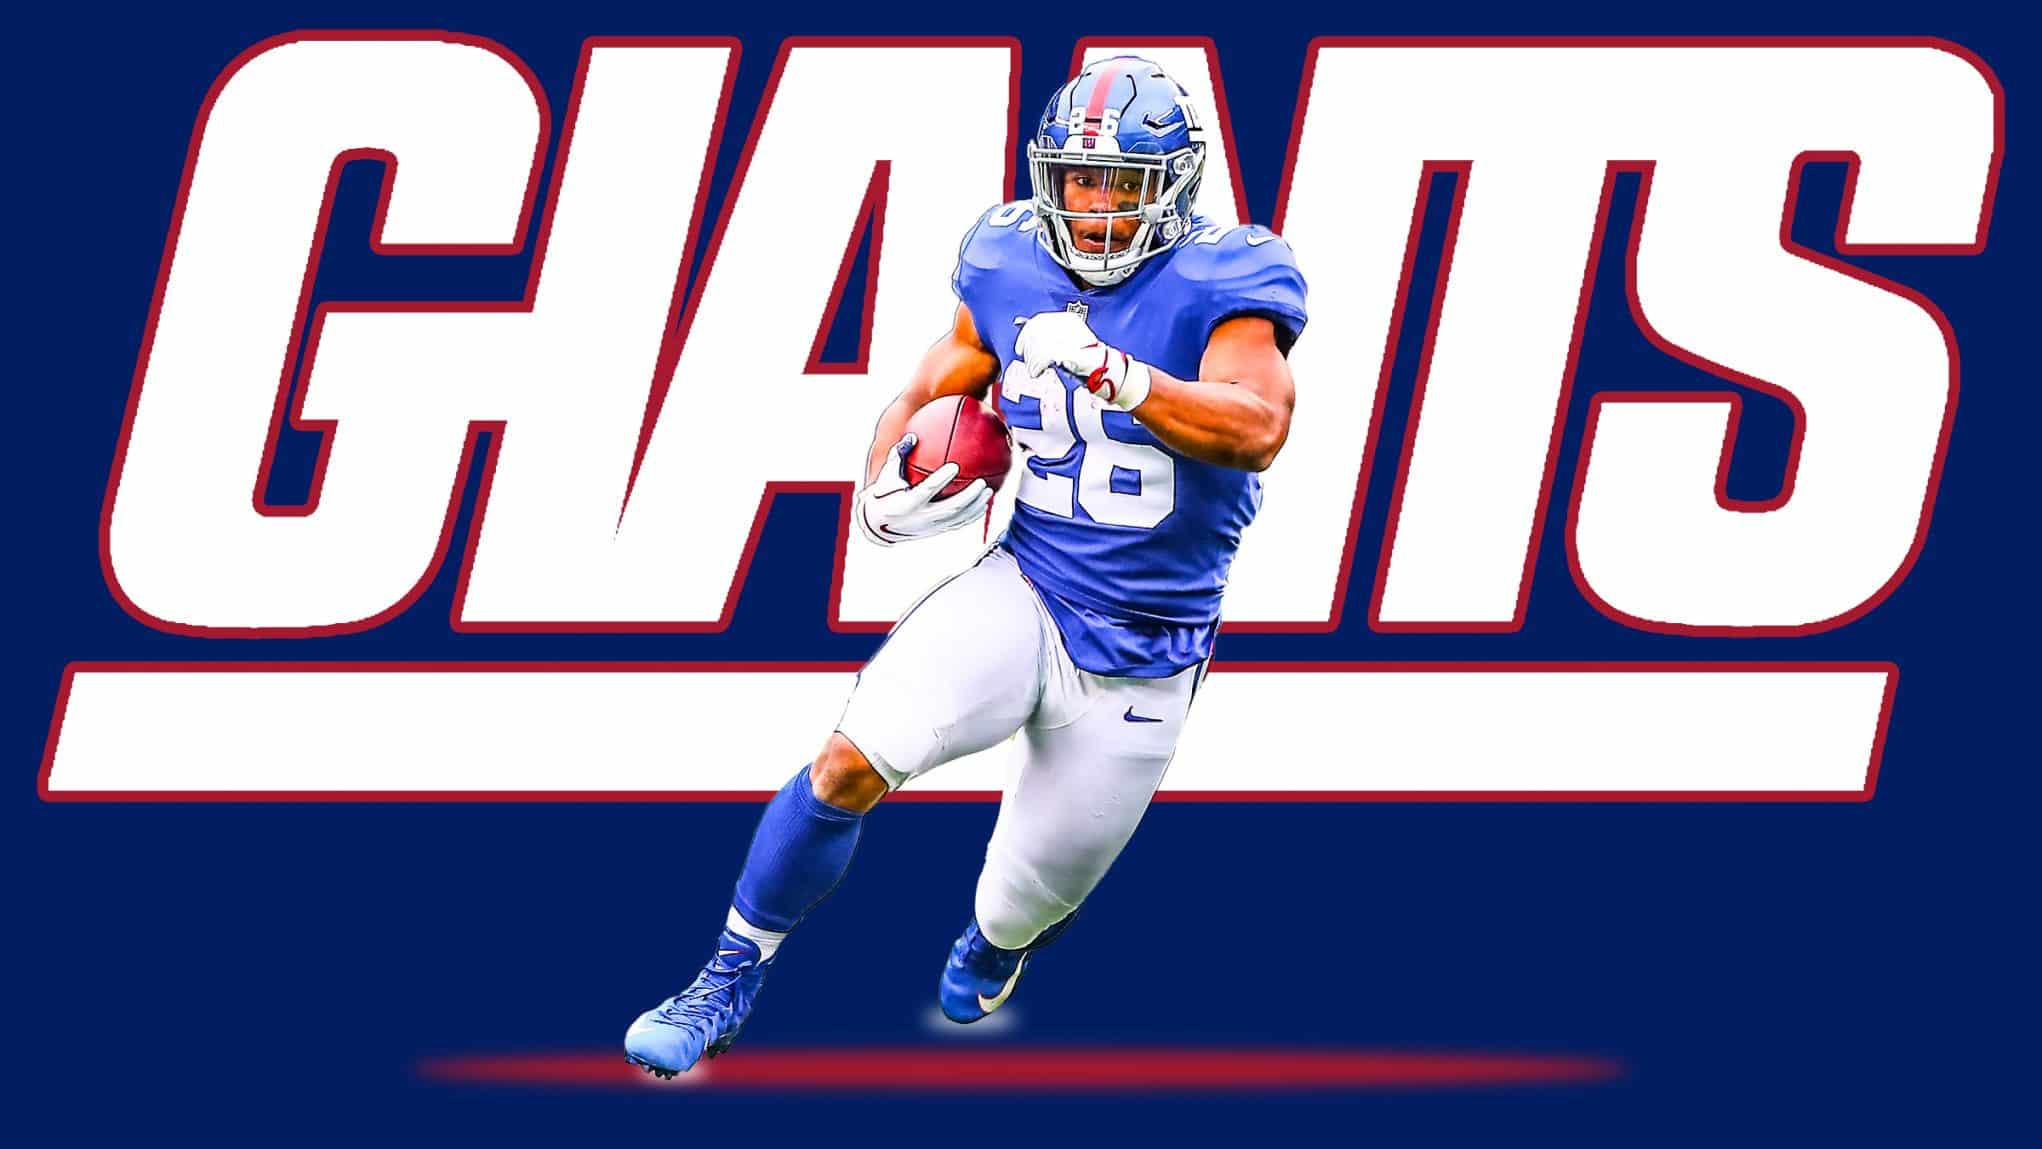 Robby Sabo, Esny Graphic, Getty Images - New York Giants Helmet Logo , HD Wallpaper & Backgrounds